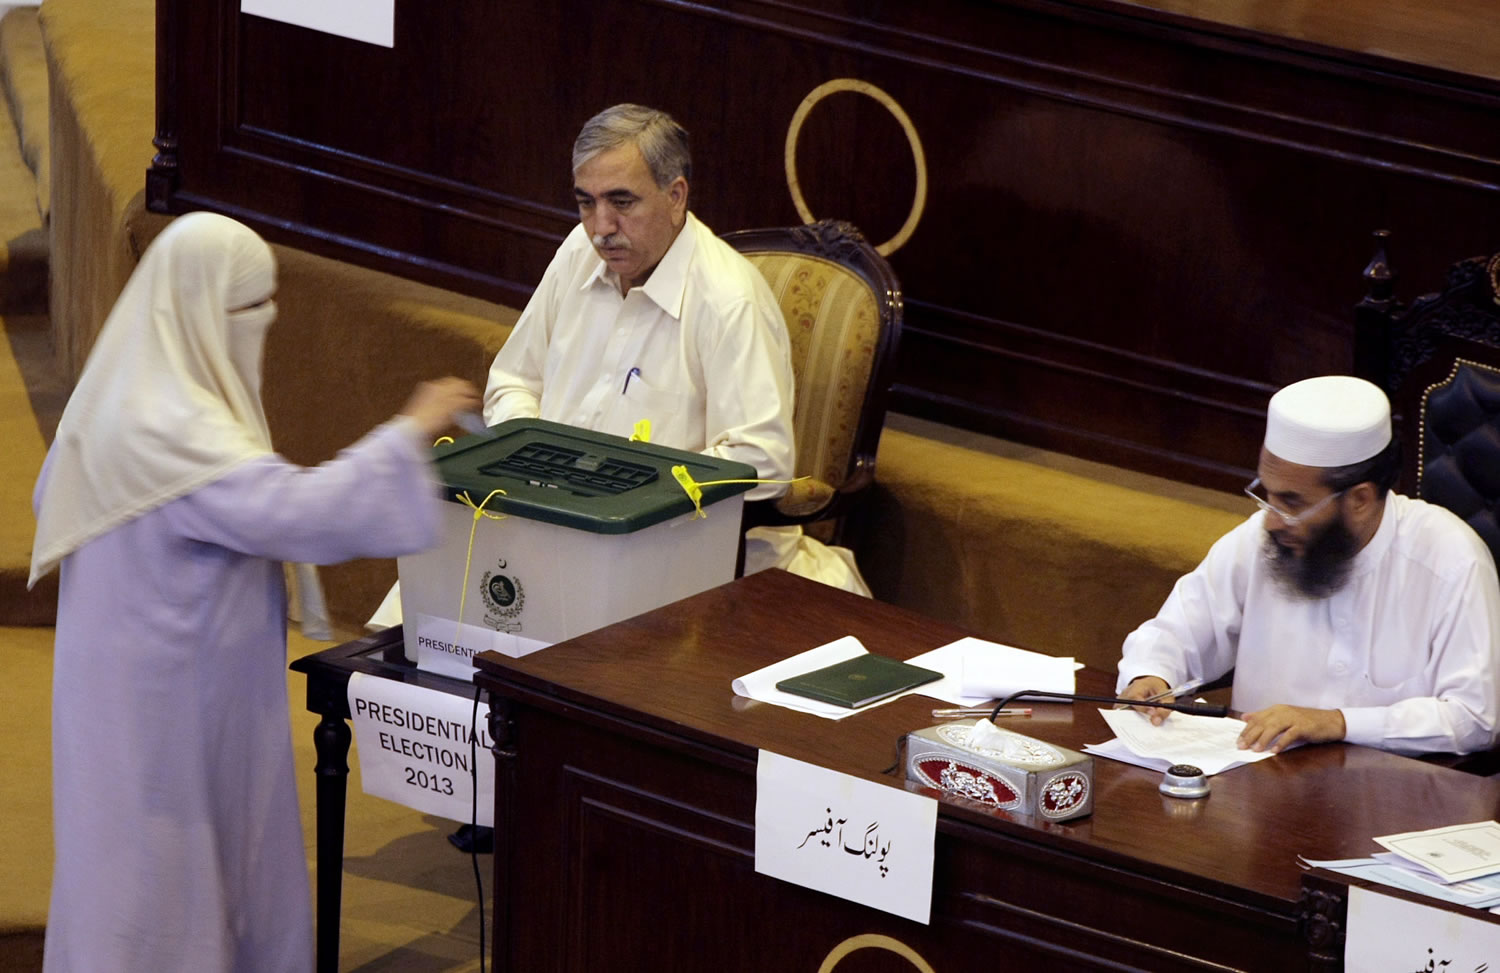 A Pakistani lawmaker casts her vote for the presidential election at the Provincial assembly in Peshawar, Pakistan, on Tuesday.